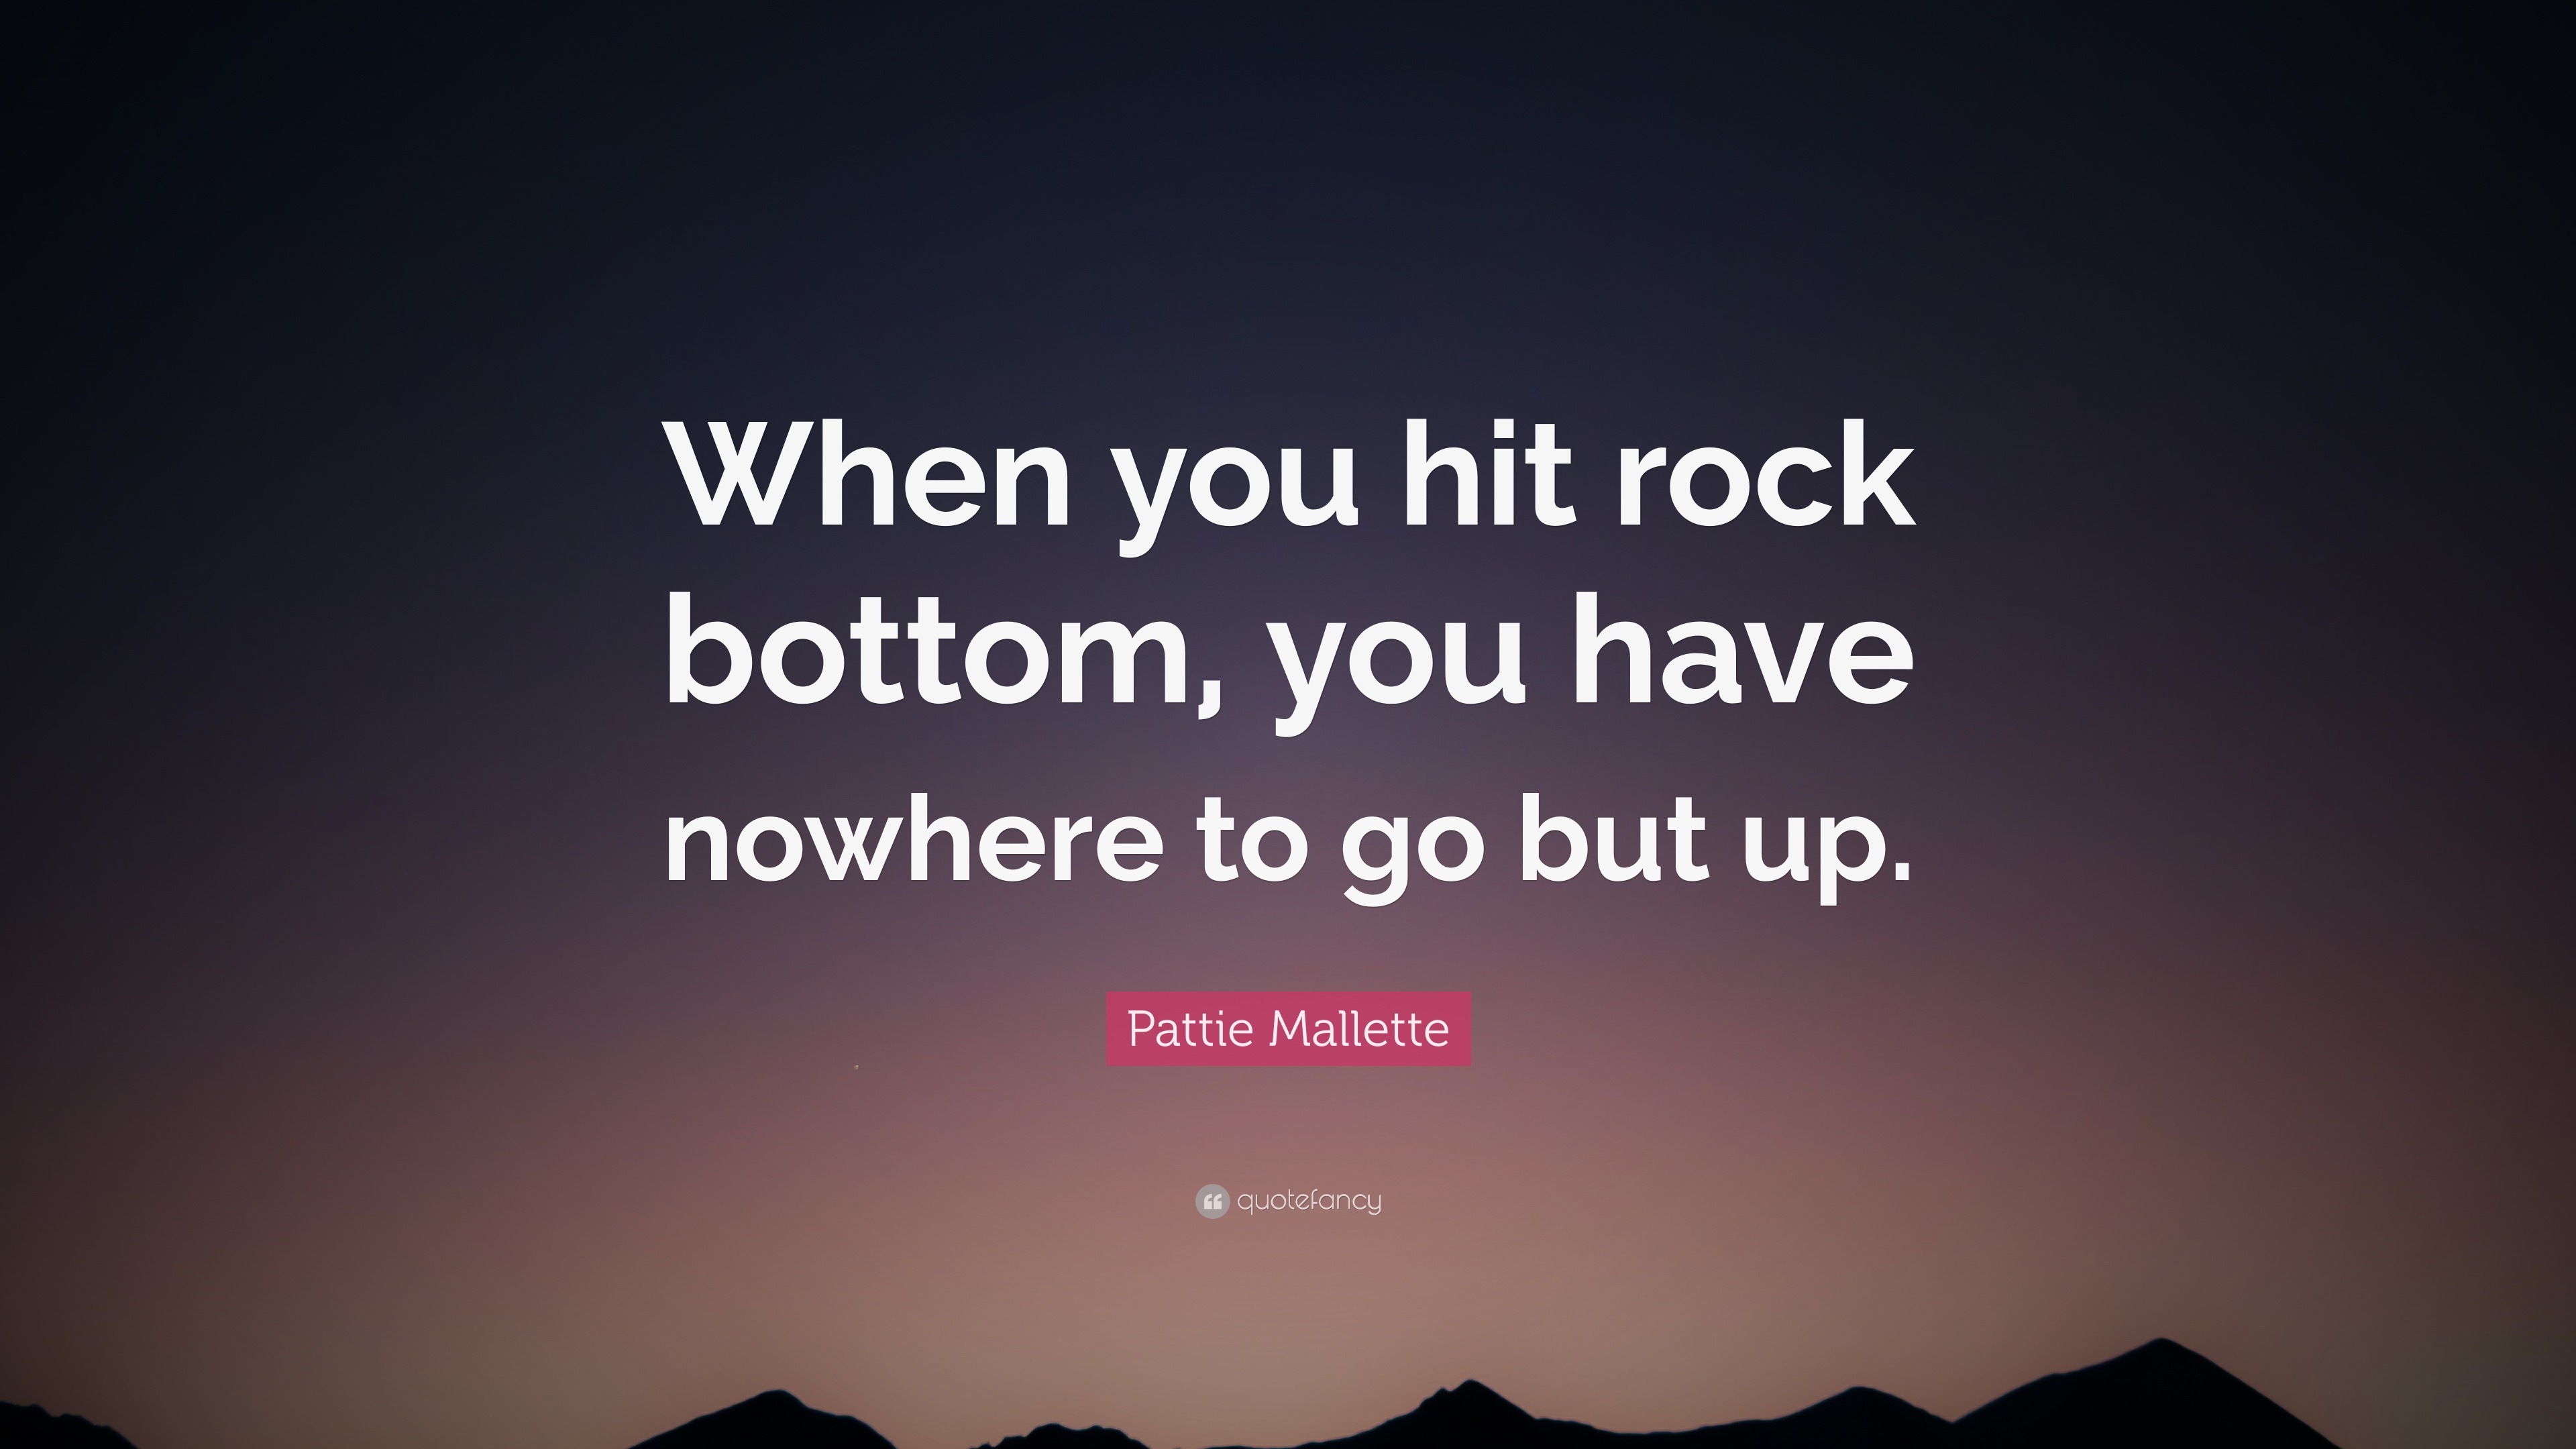 Pattie Mallette Quote “when You Hit Rock Bottom You Have Nowhere To Go But Up ”